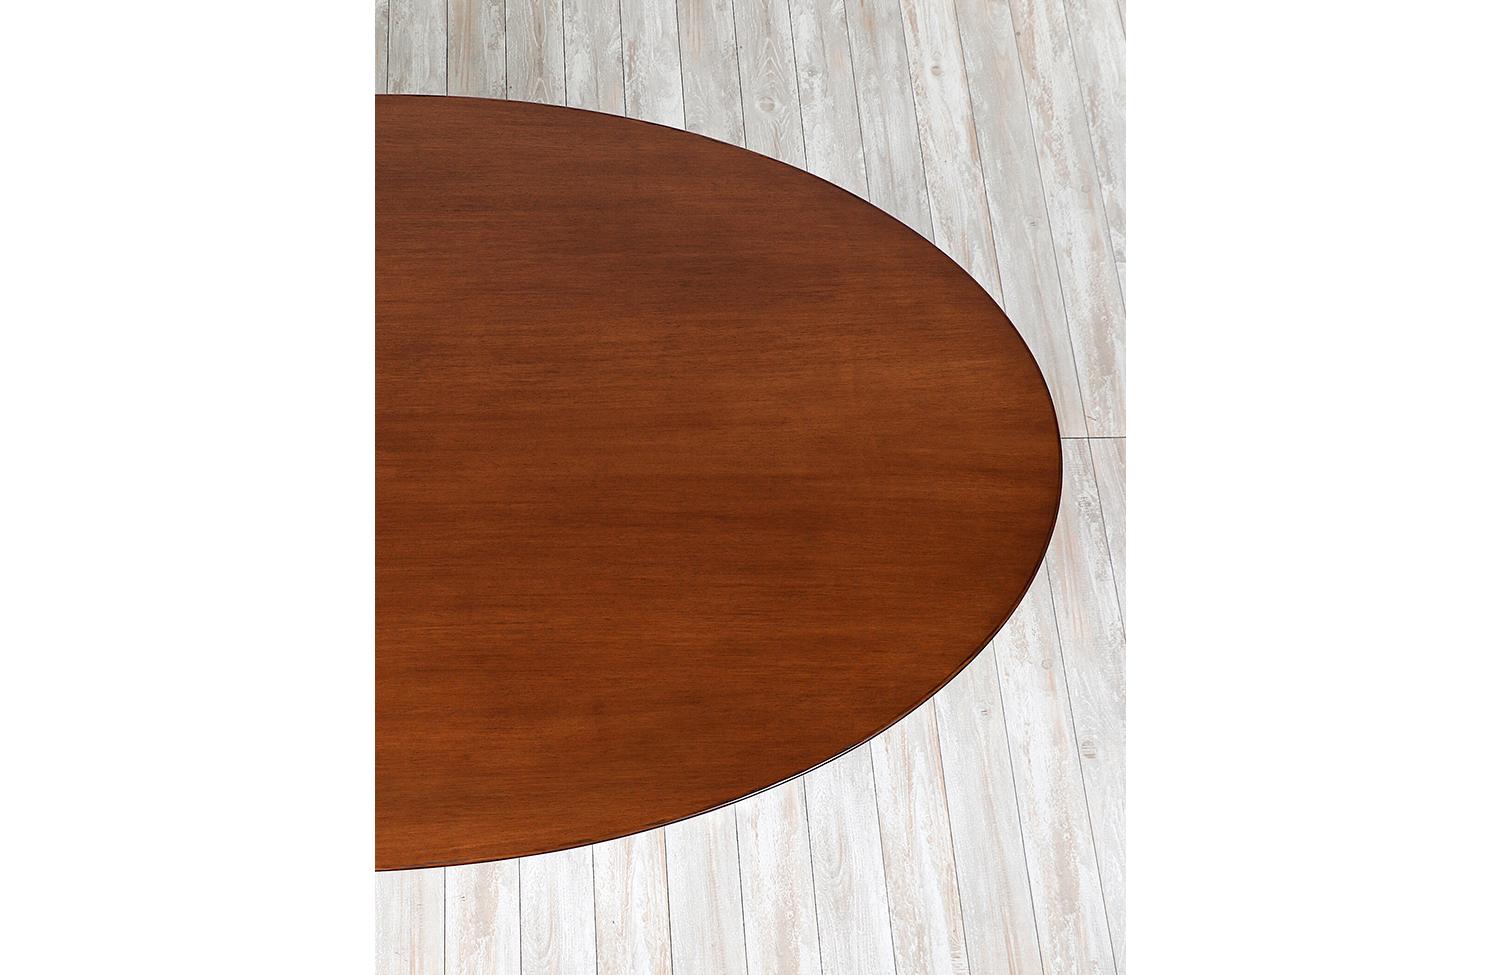 Florence Knoll Walnut & Chrome Oval Dining Table or Desk for Knoll Inc. For Sale 2